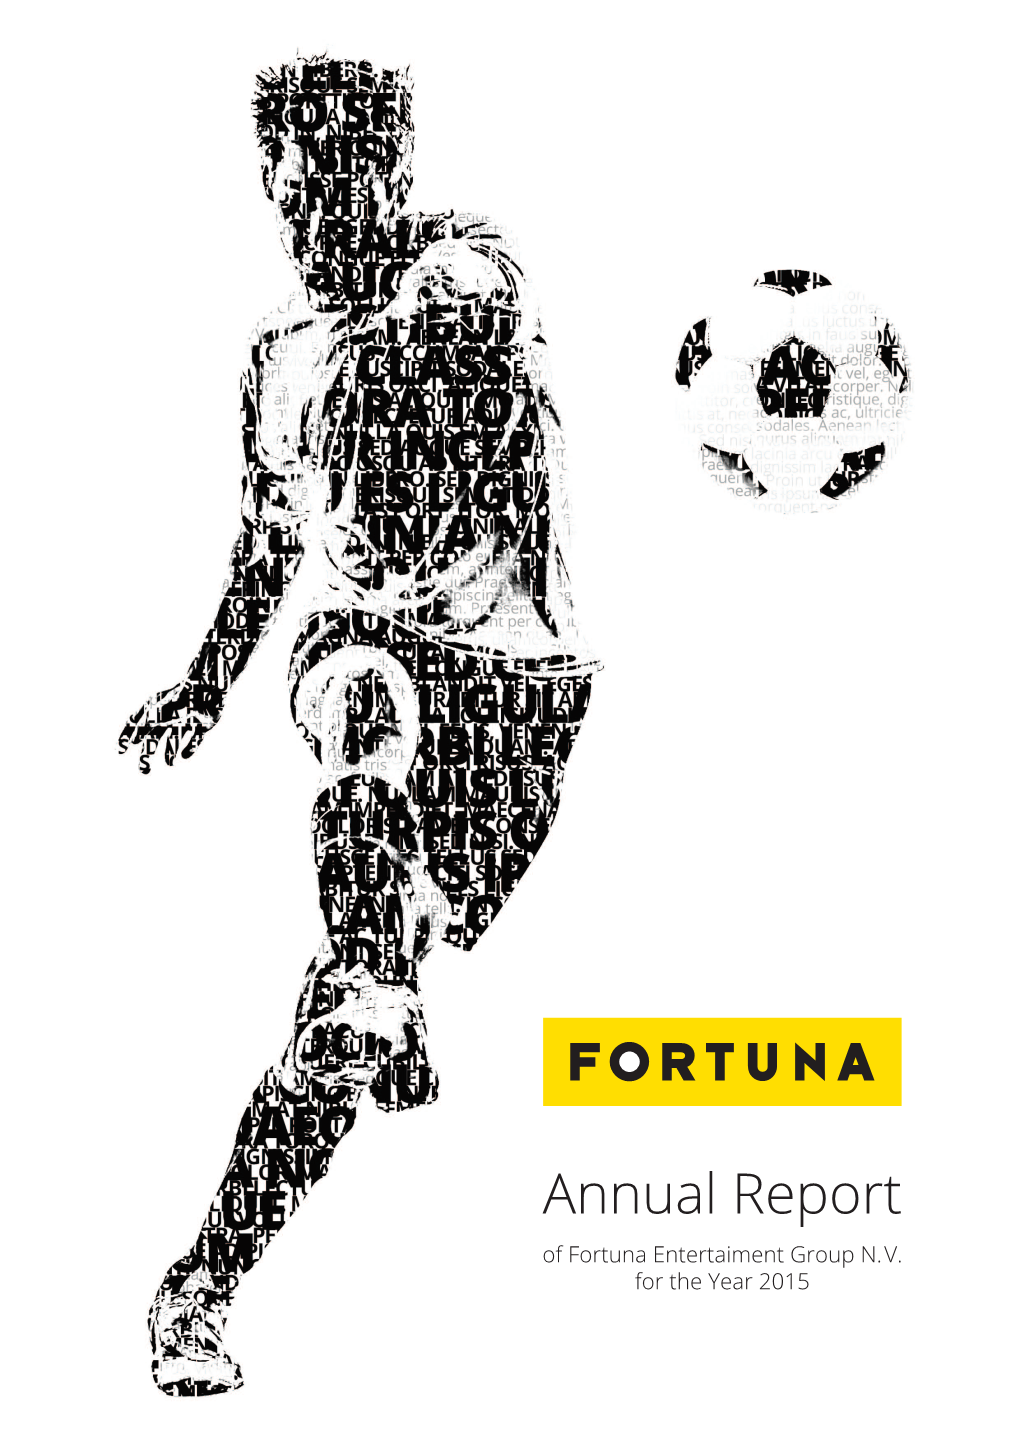 Annual Report of Fortuna Entertaiment Group N